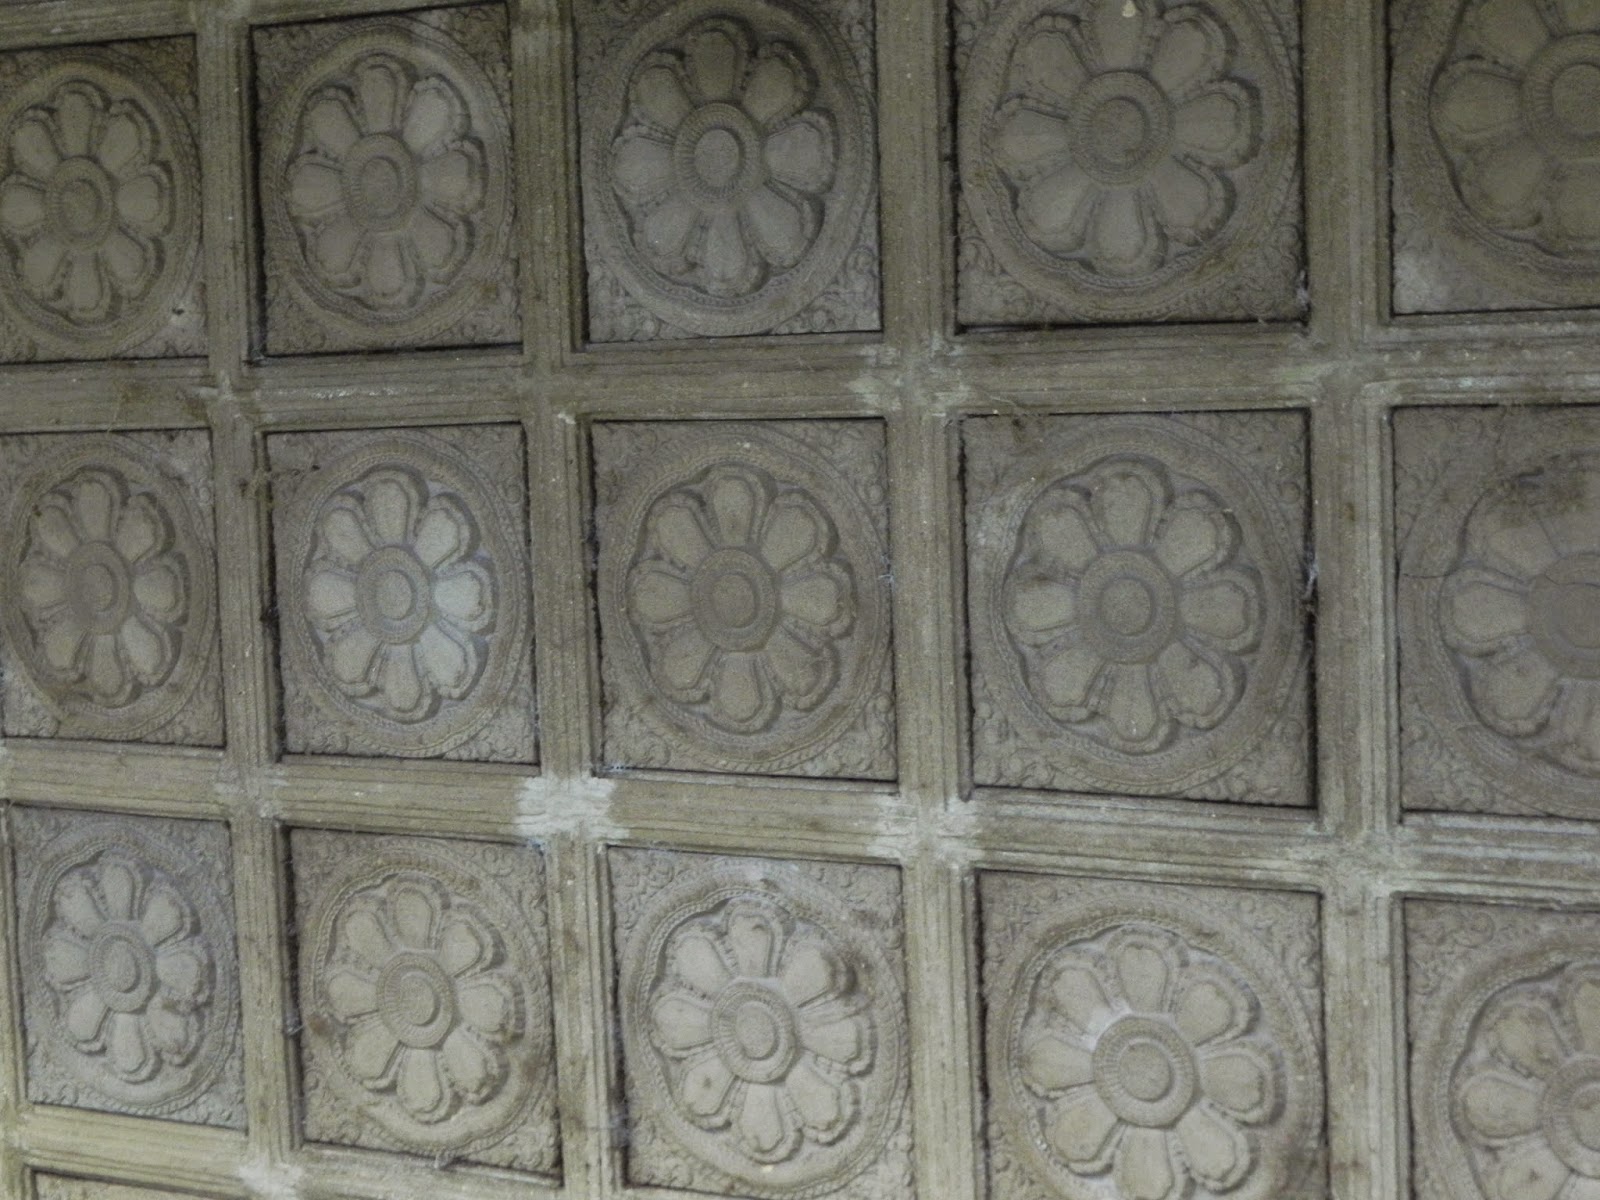 Carved lotus on the ceilings of the Angkor Wat Temple